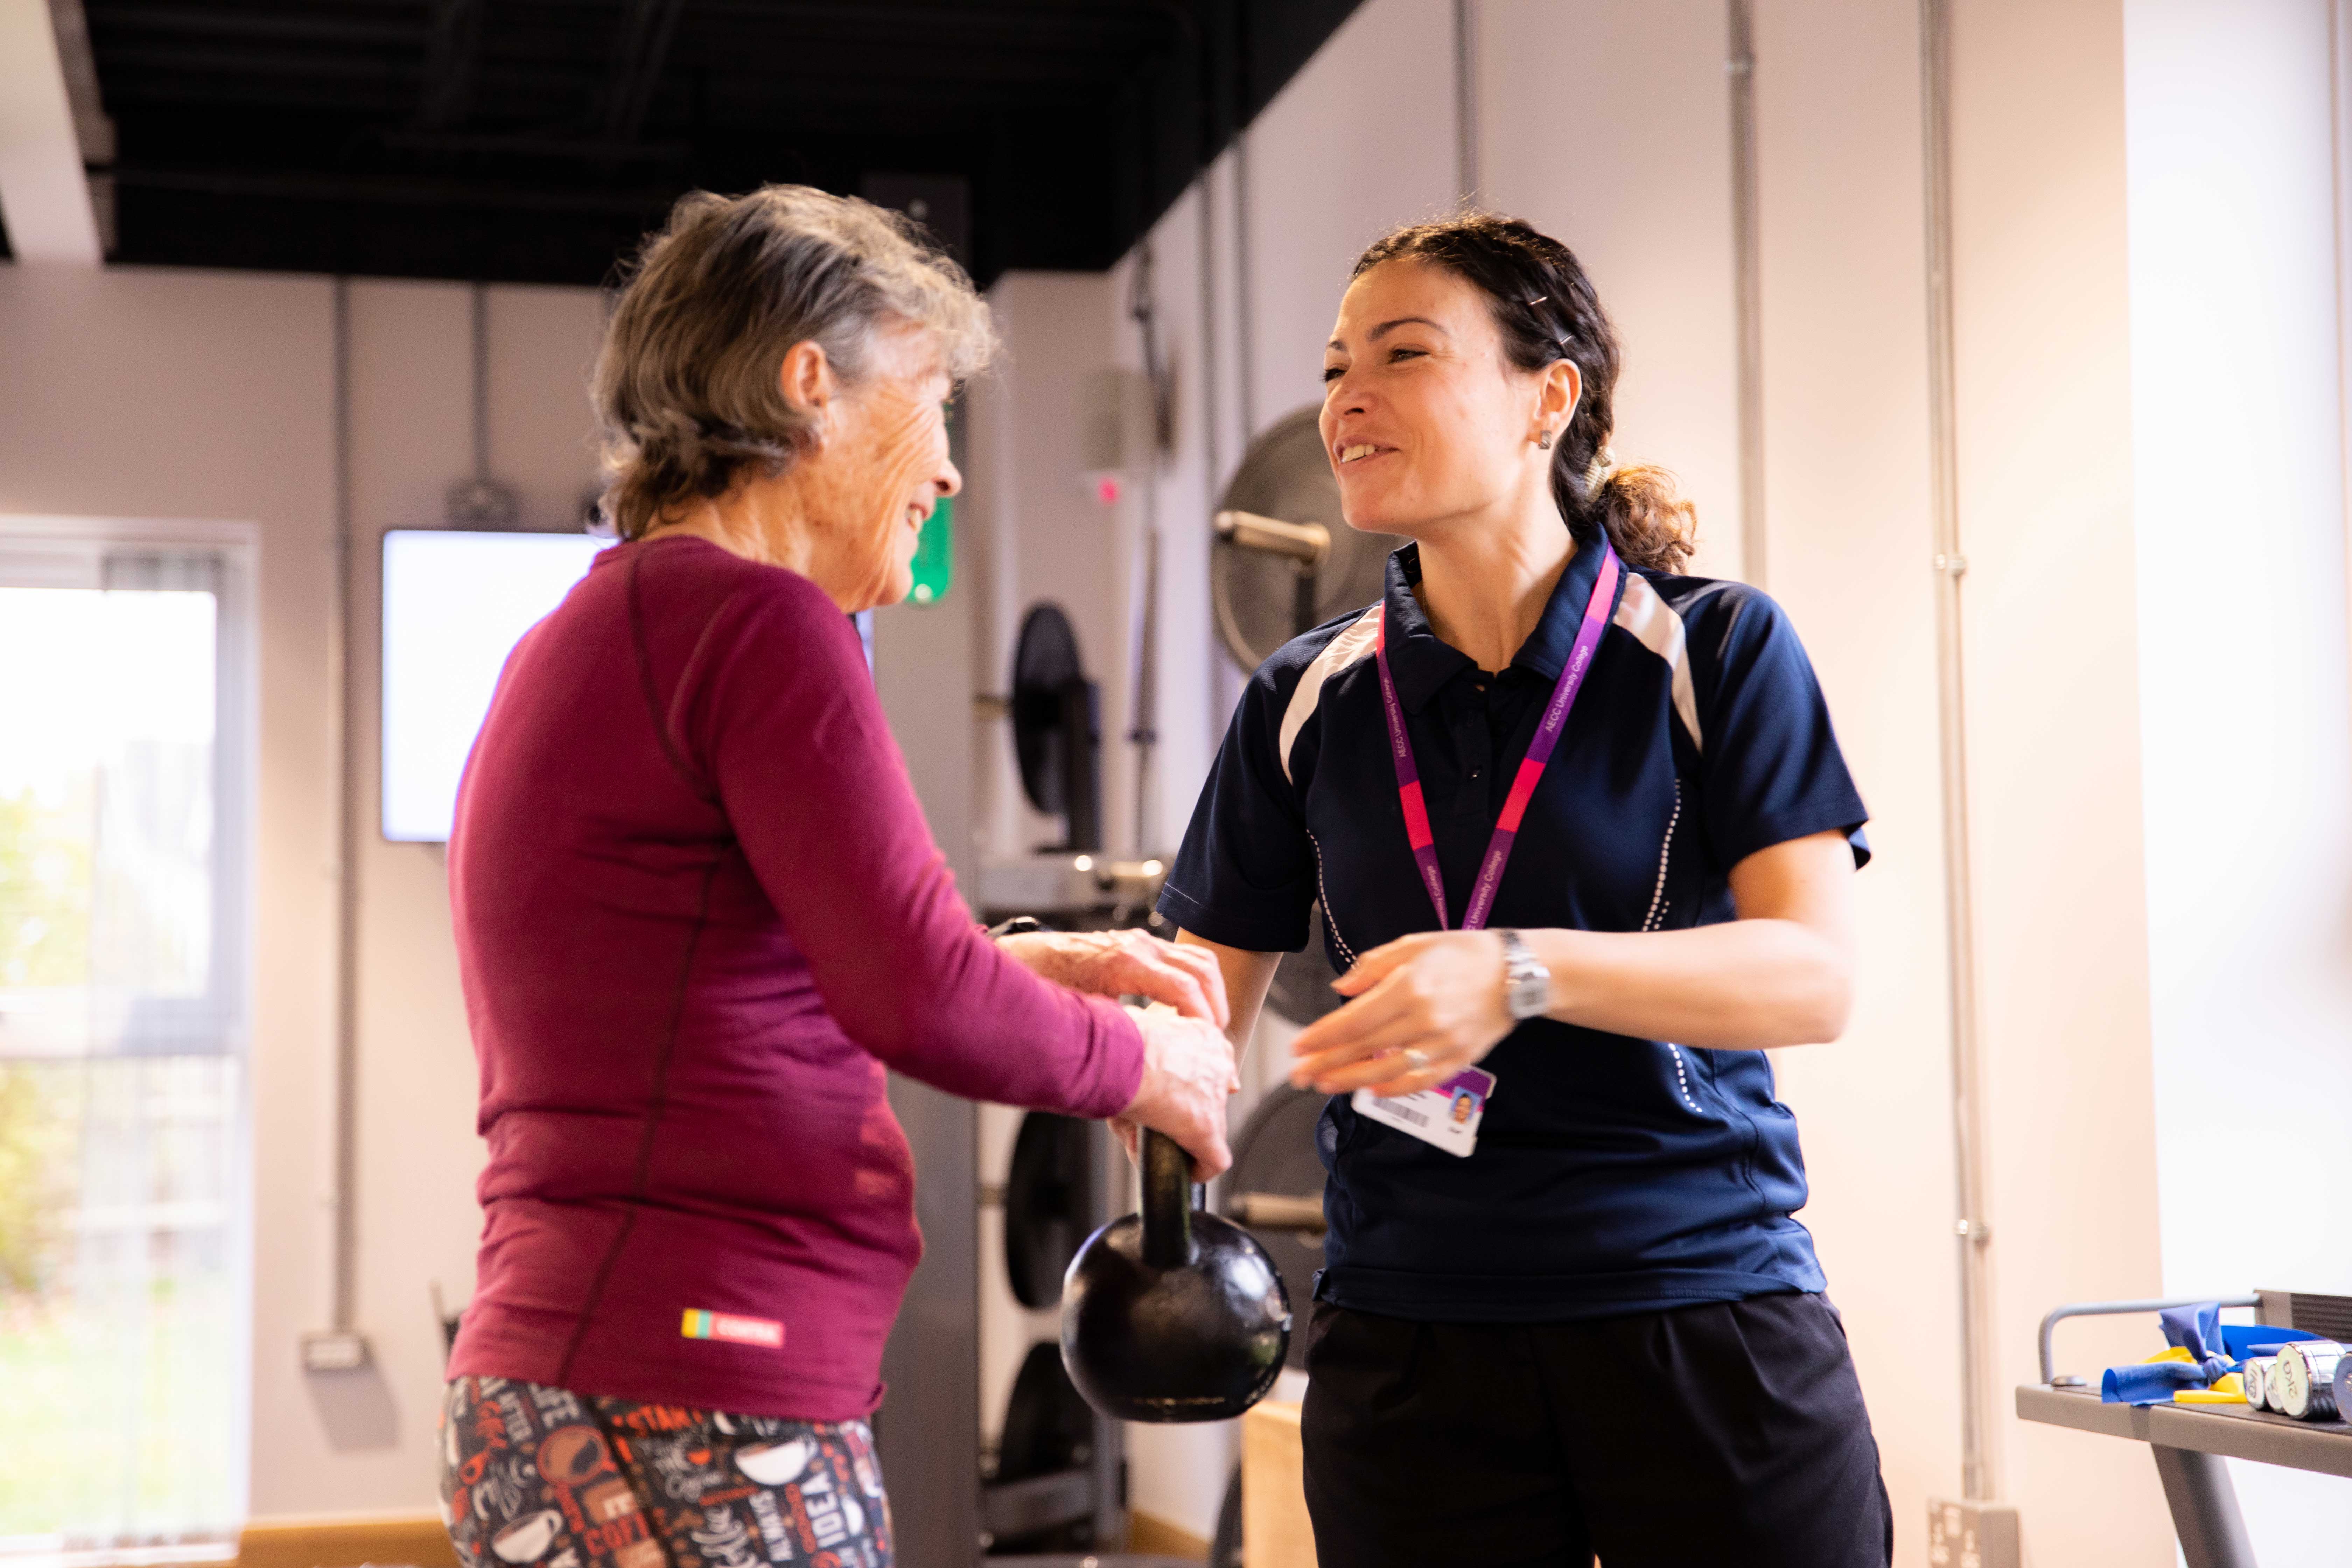 Physiotherapist handing an elderly patient a kettle bell during an exercise rehabilitation session